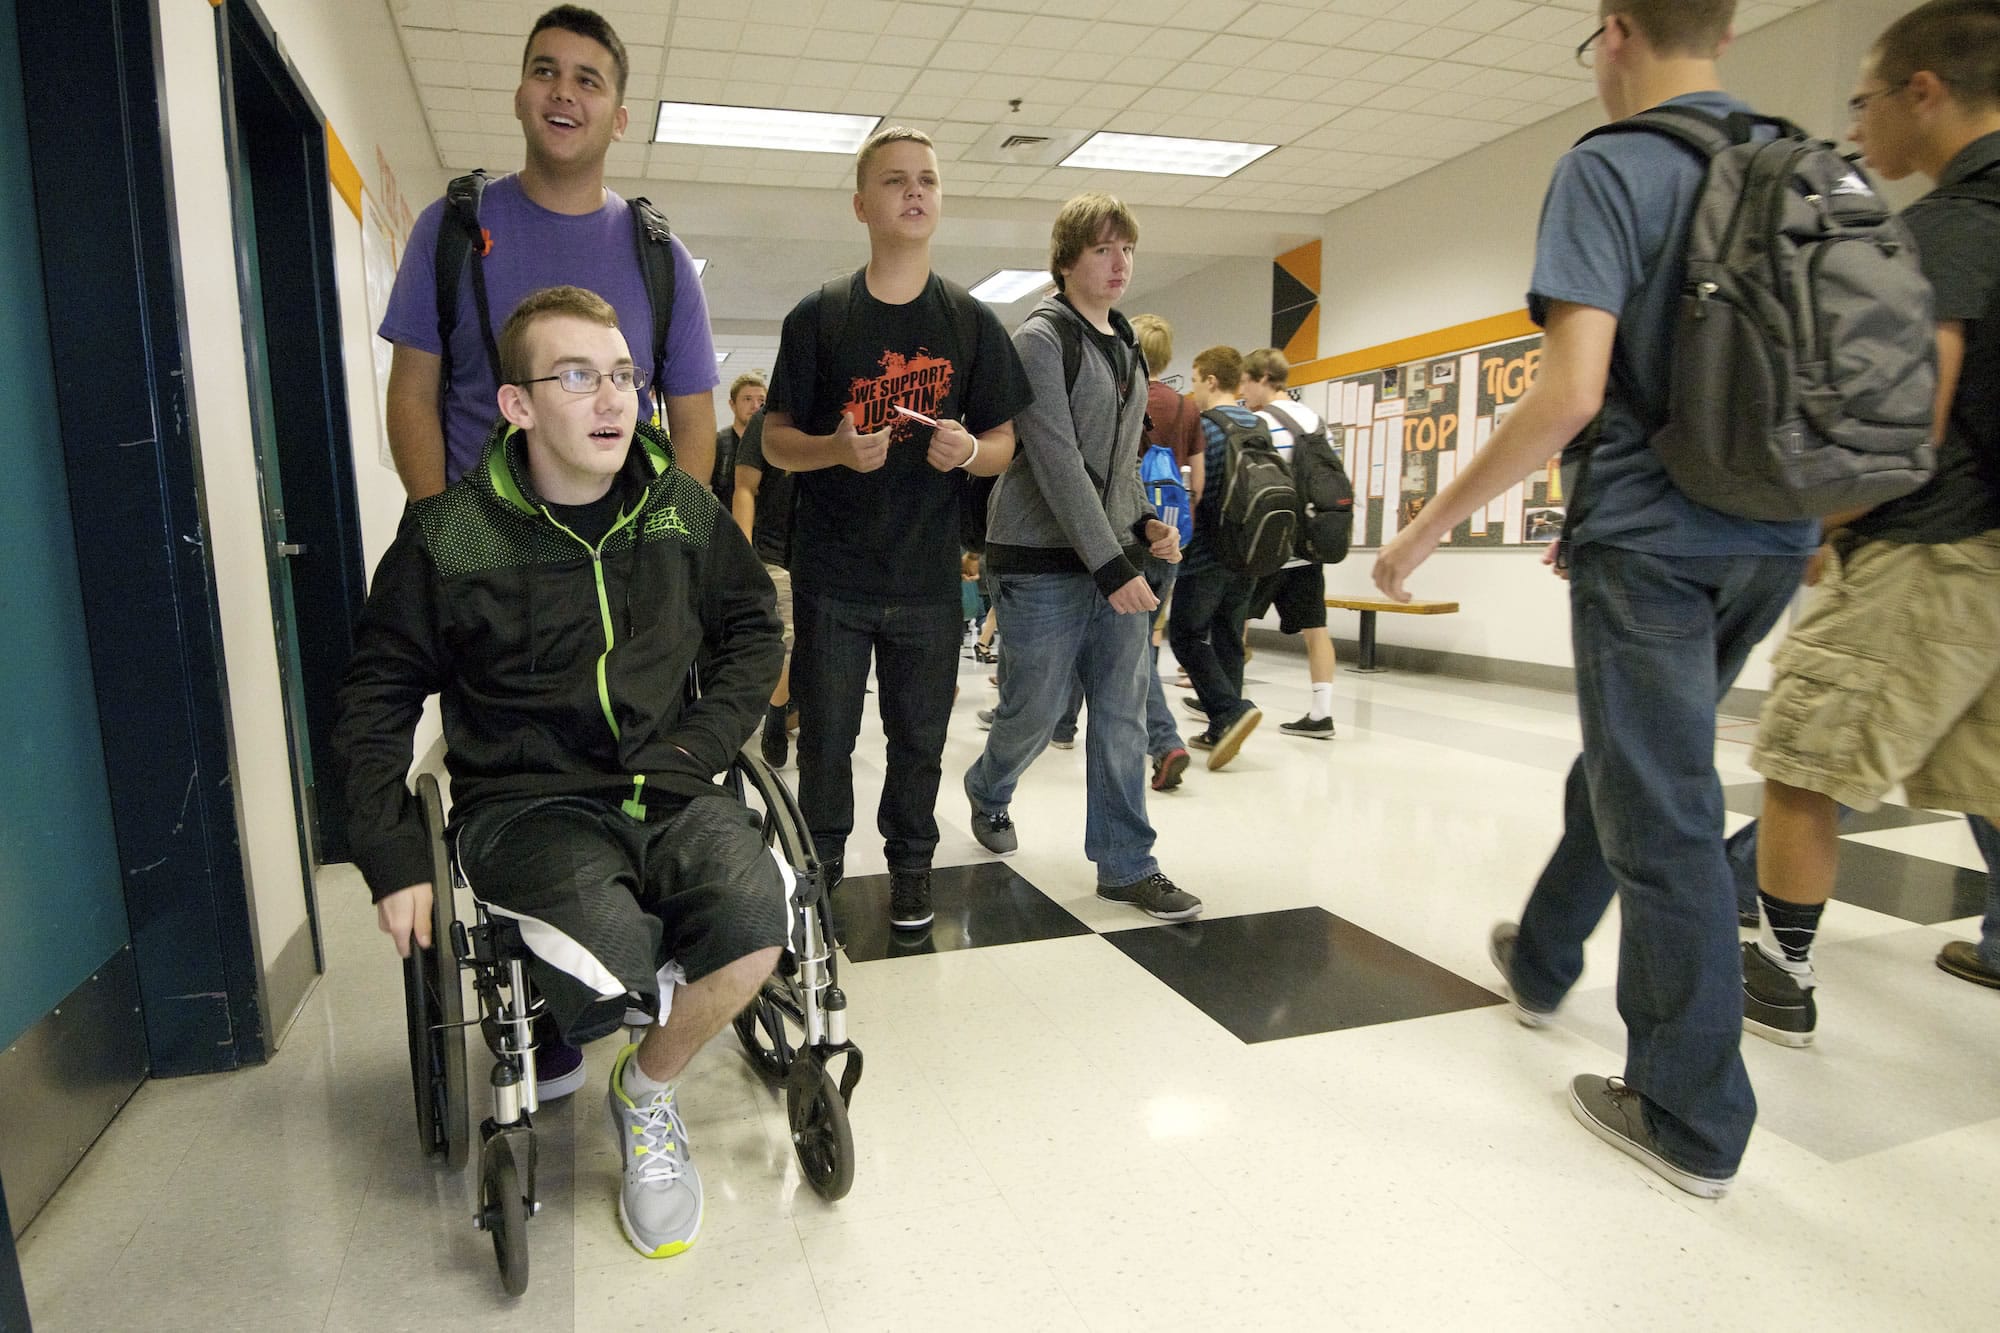 With the help of his friend Zechariah Maniar, 16, Justin Carey uses a wheelchair to make his way through the halls of Battle Ground High School on the first day of school Wednesday.